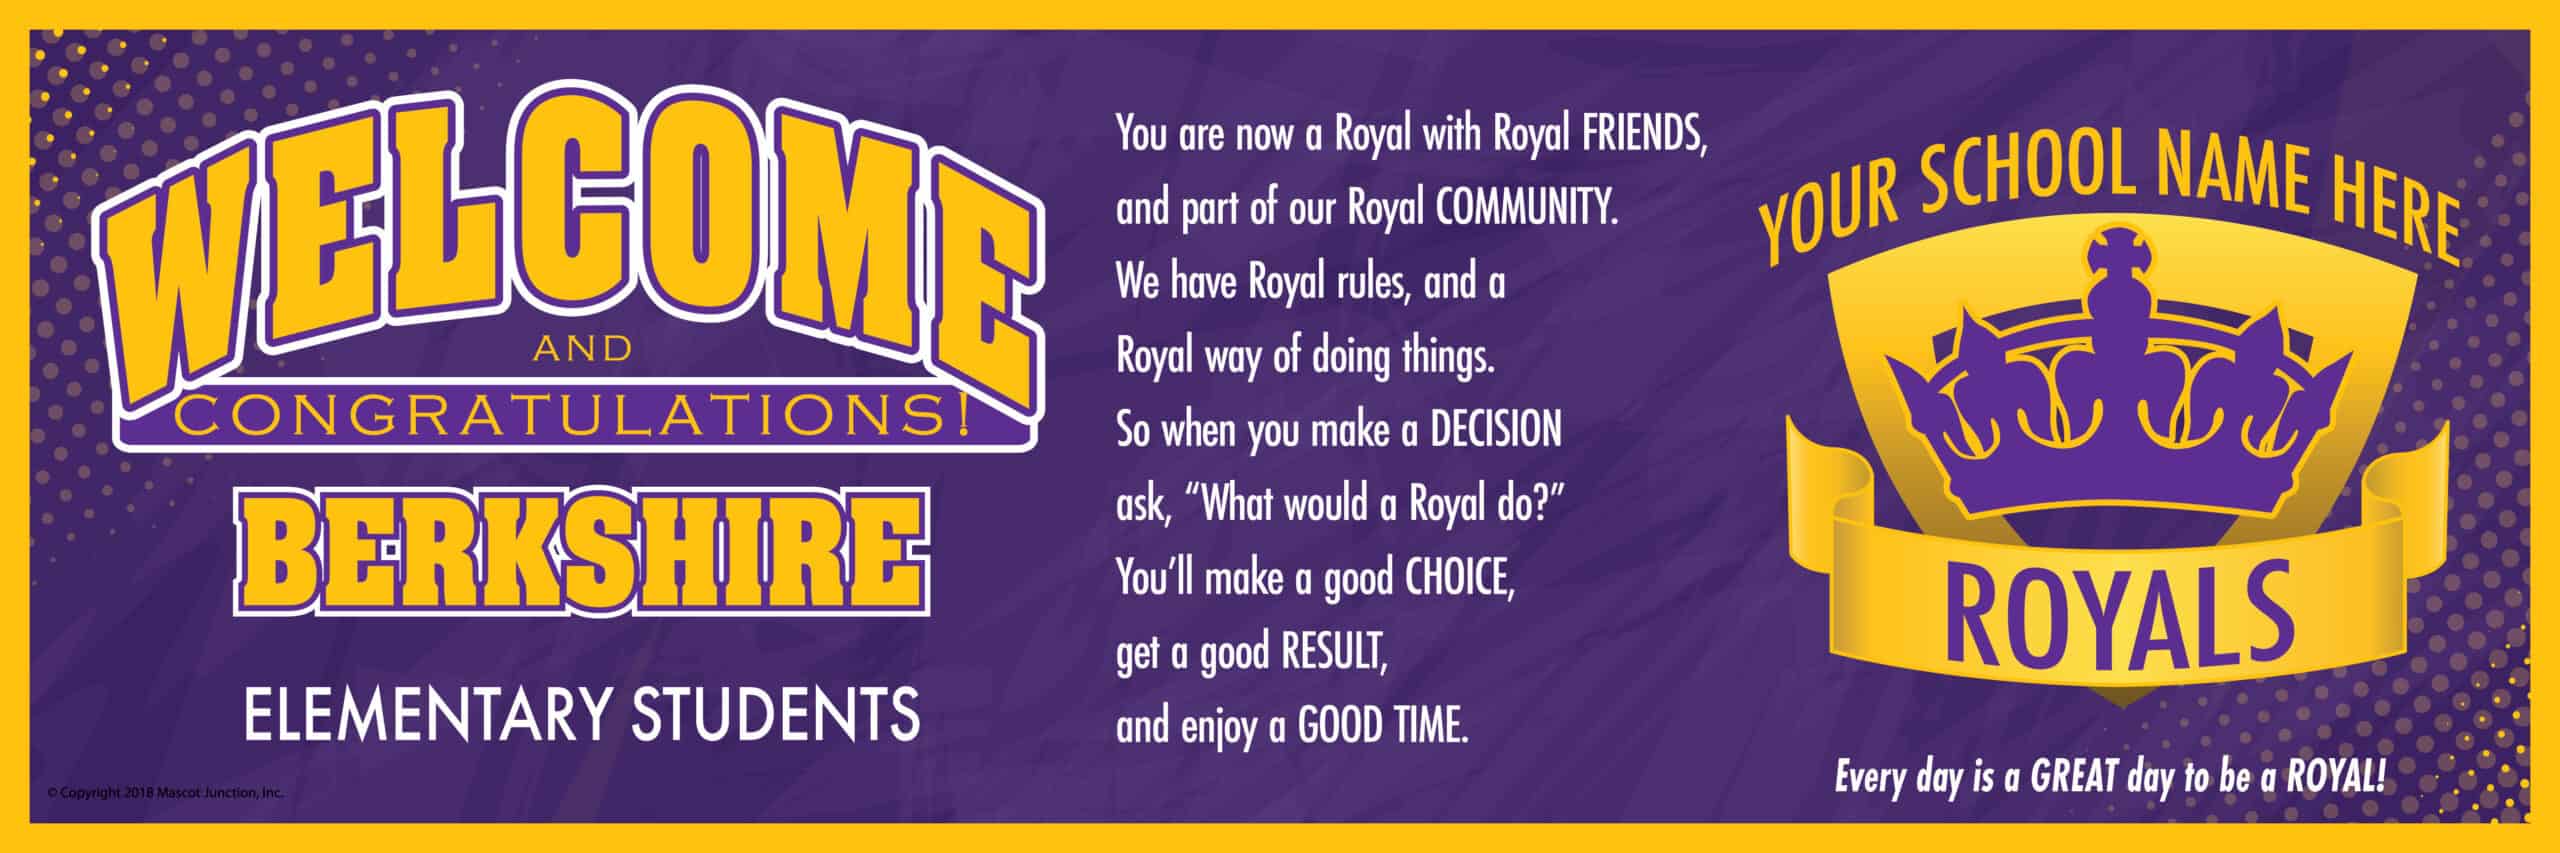 welcome-message-banner-royals